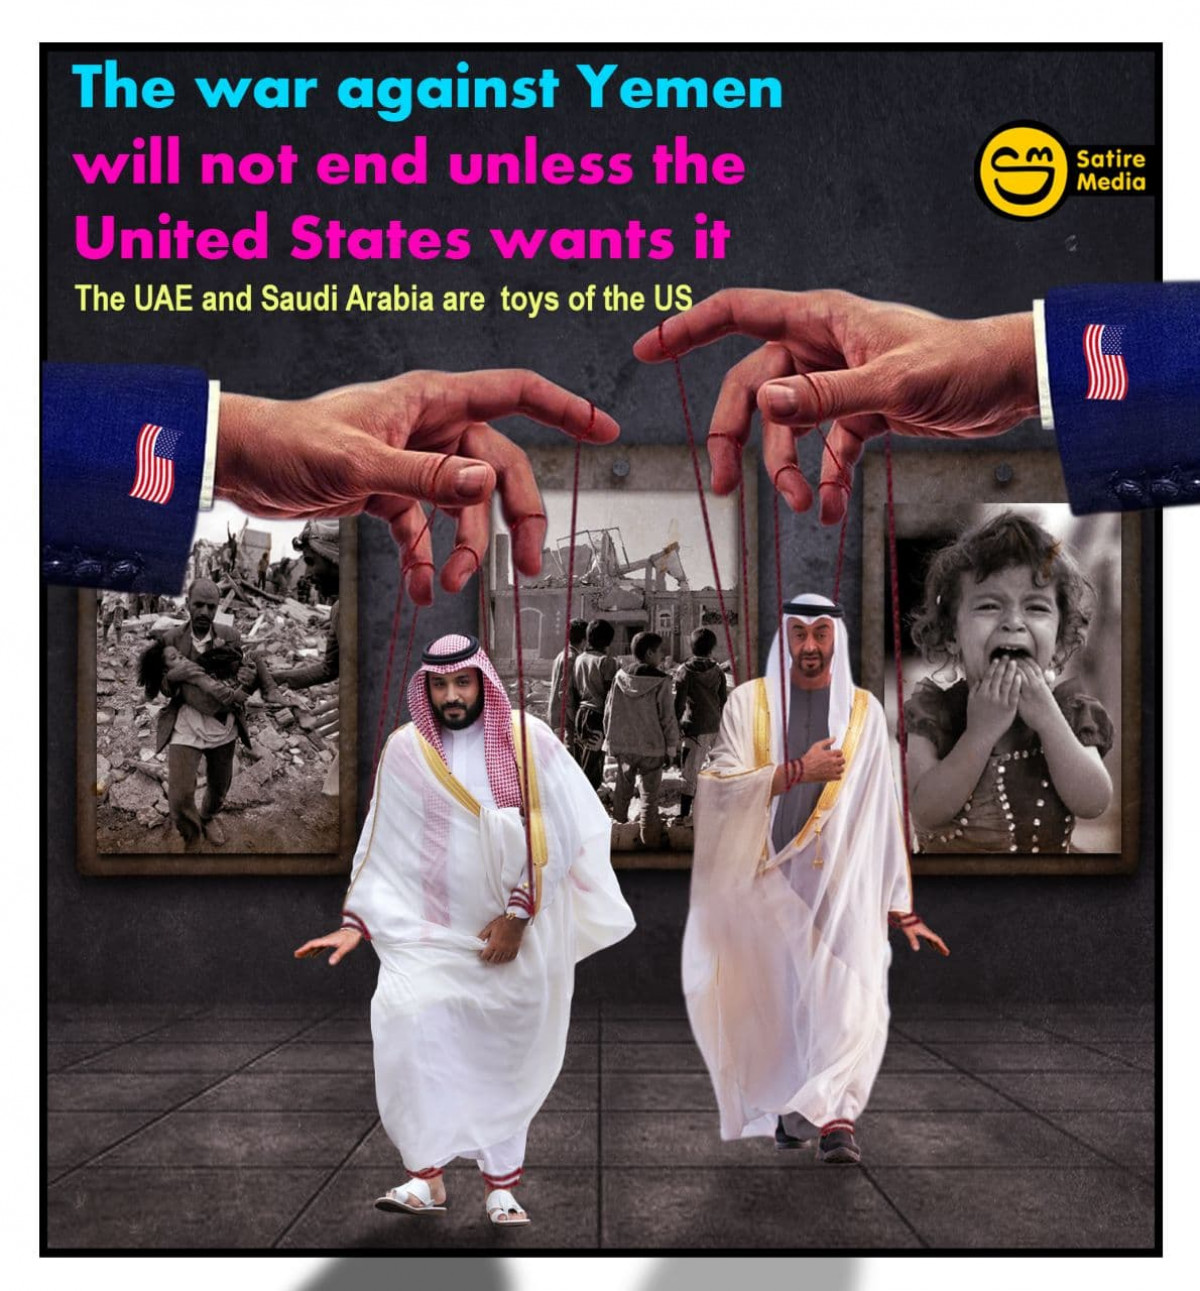 The war against Yemen will not end unless the United States wants it